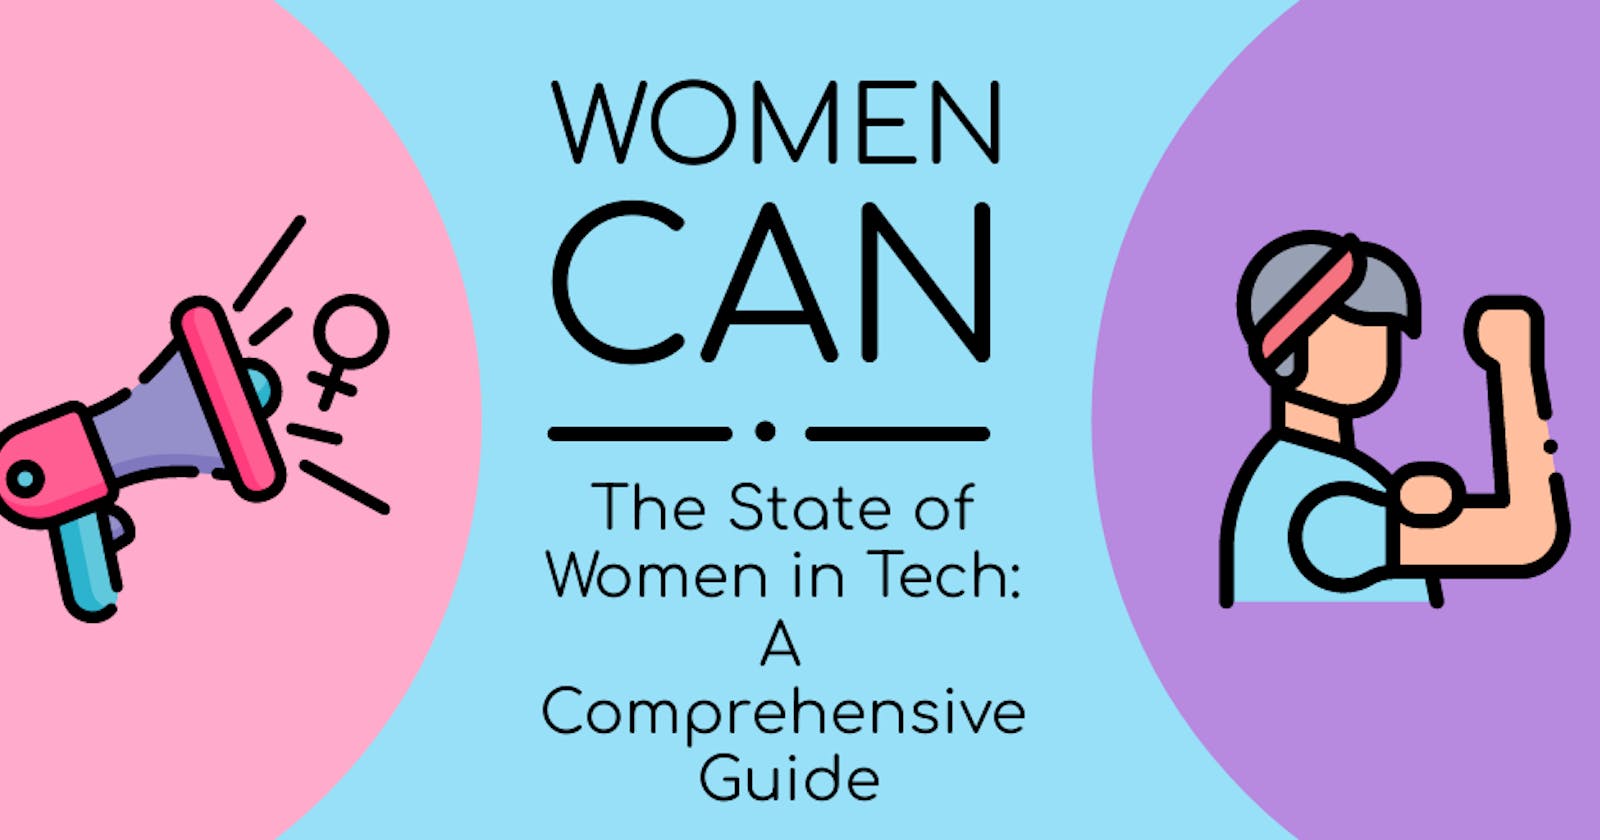 The State of Women in Tech: A Comprehensive Guide.